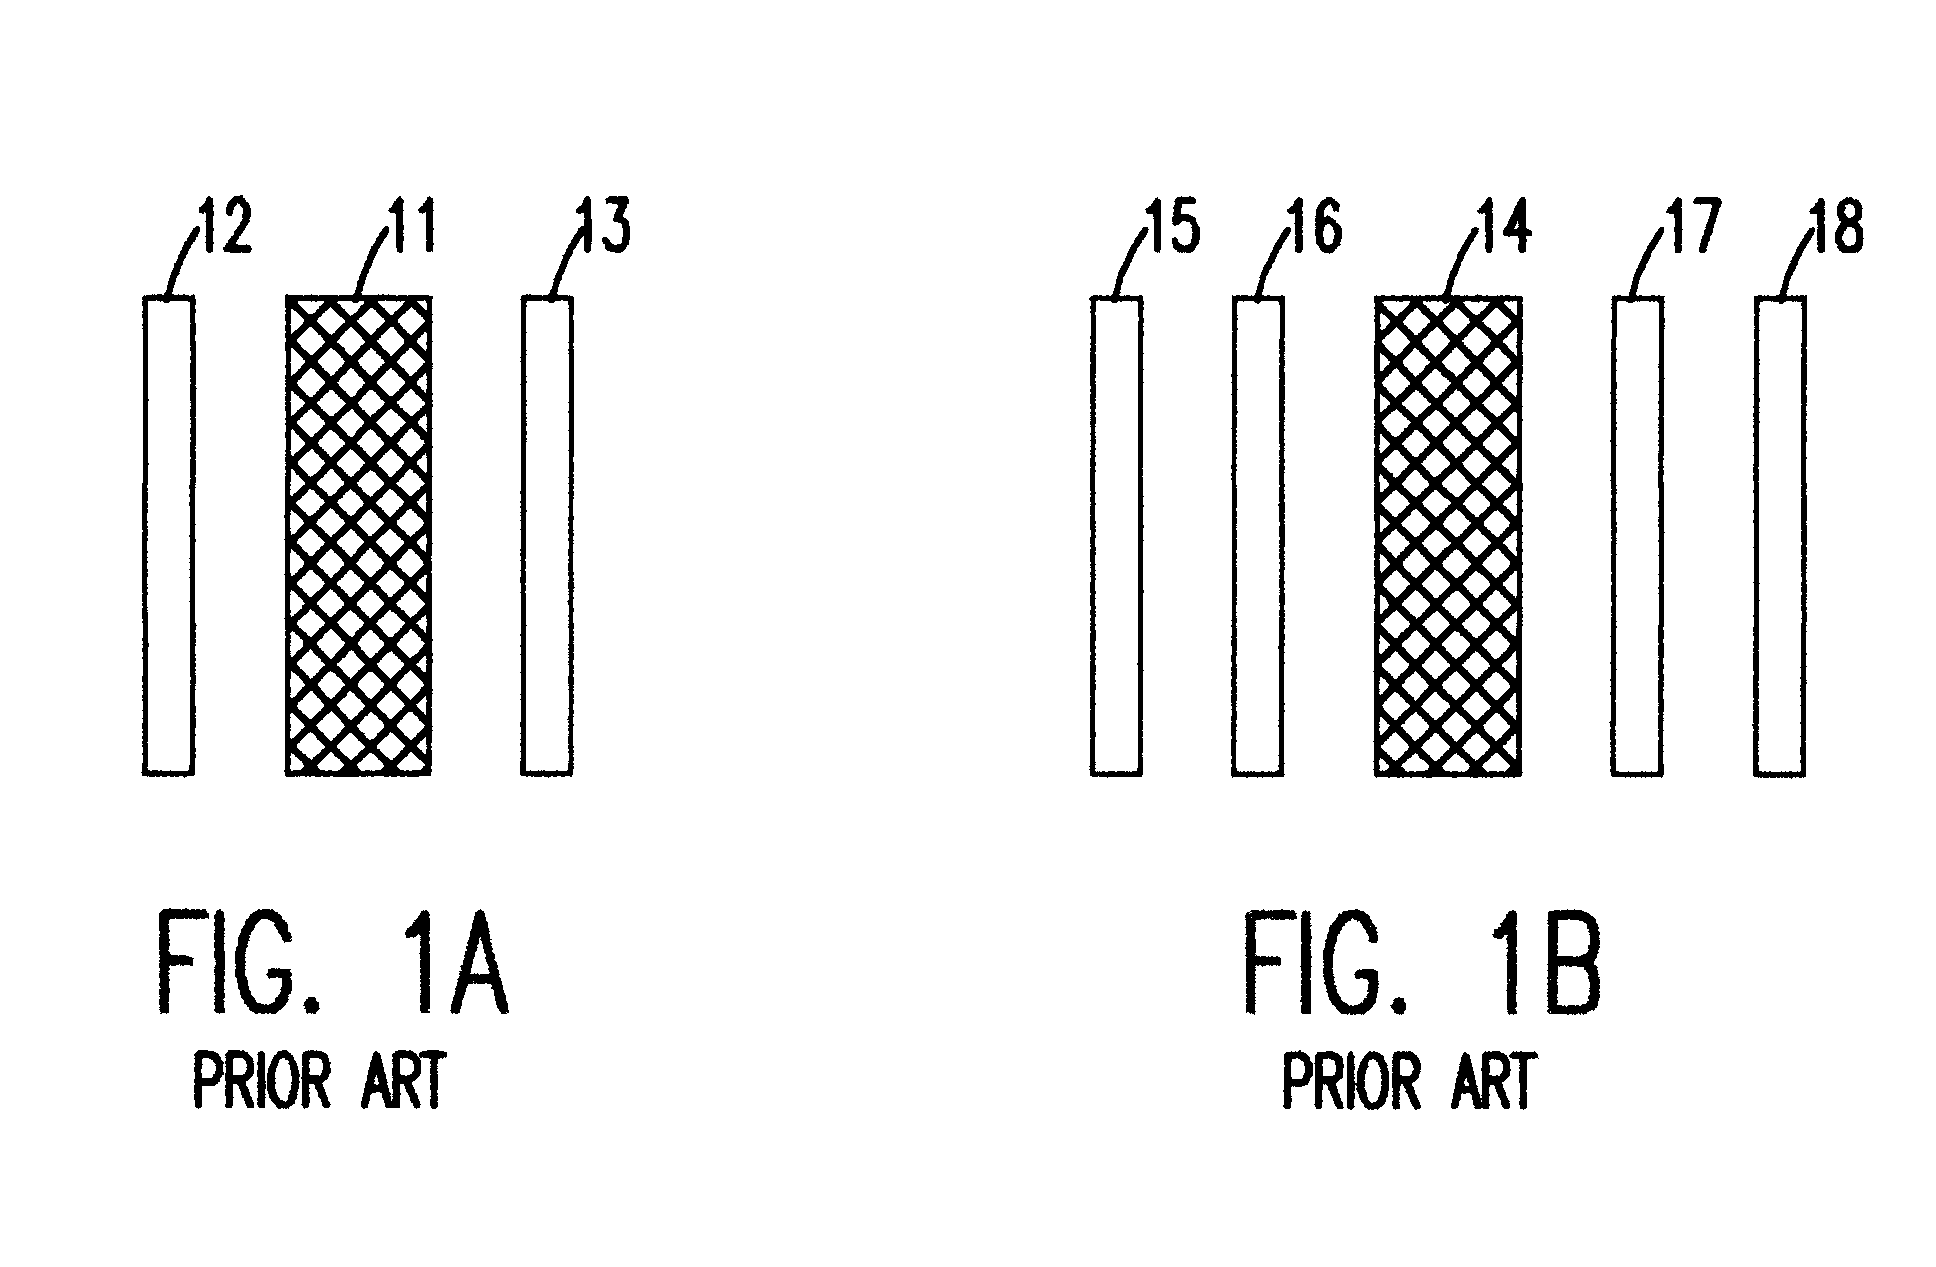 Method to determine optical proximity correction and assist feature rules which account for variations in mask dimensions